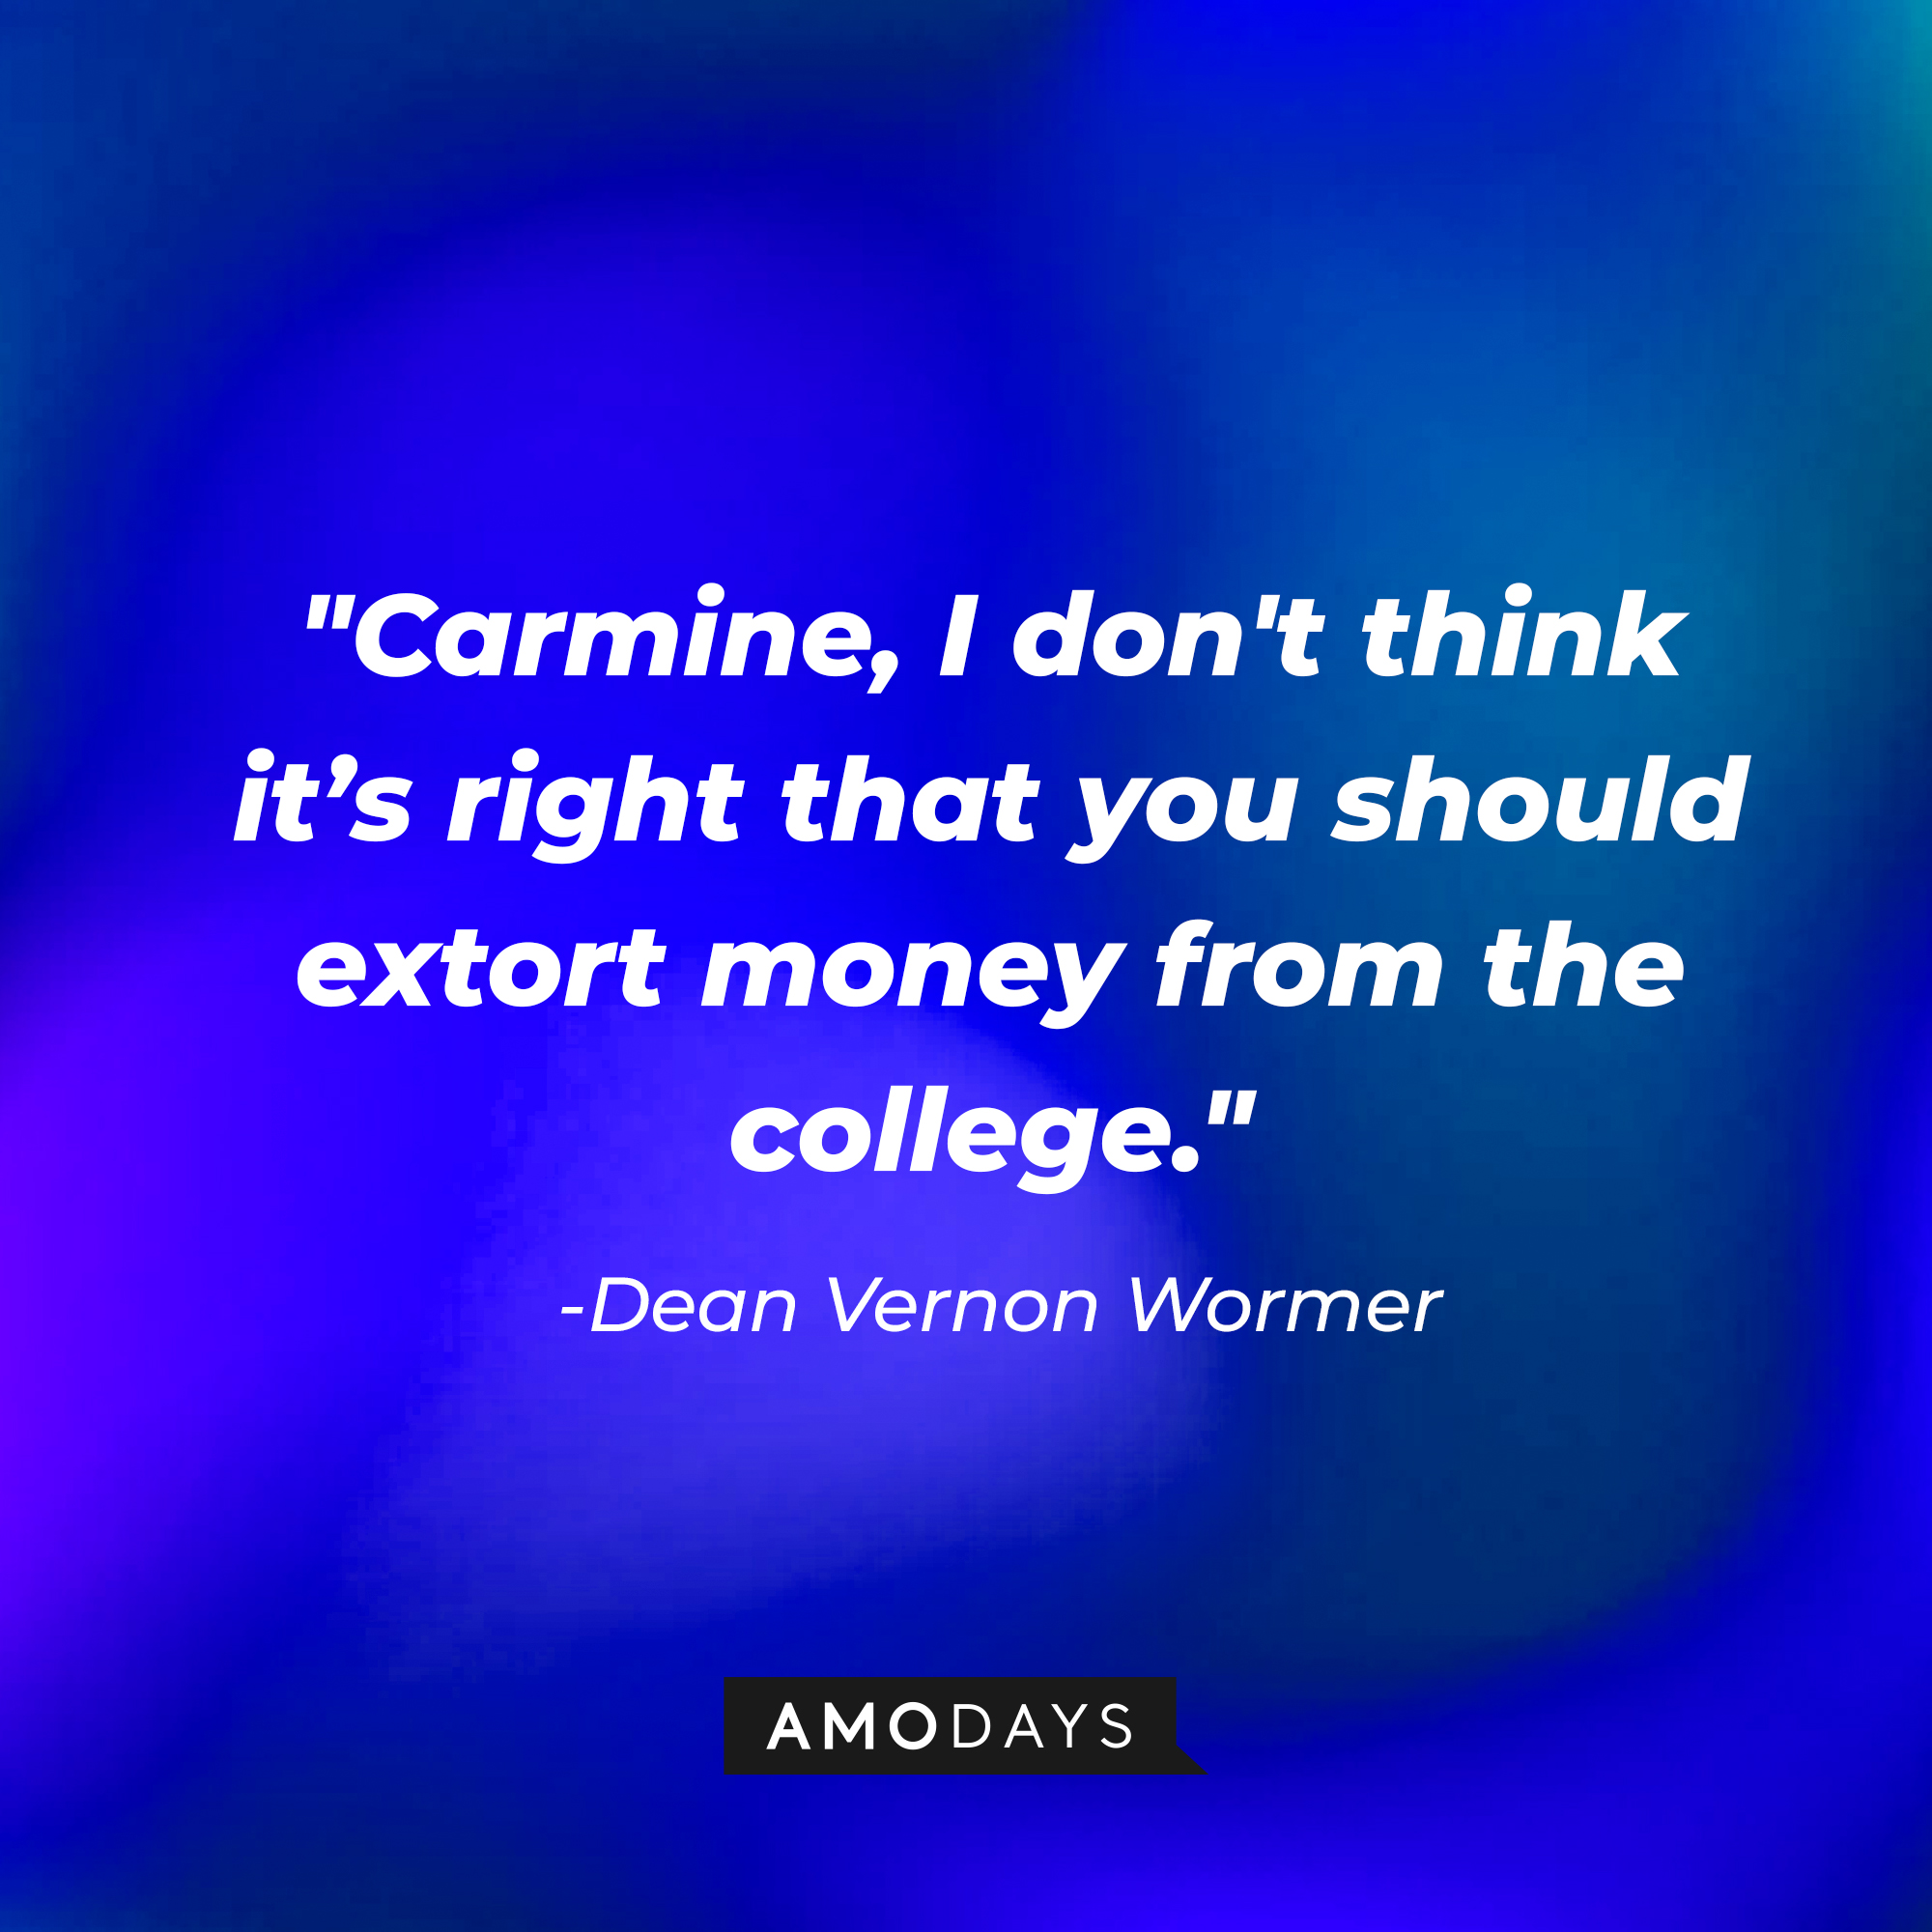 Dean Vernon Wormer's quote: "Carmine, I don't think it’s right that you should extort money from the college." | Source: Amodays